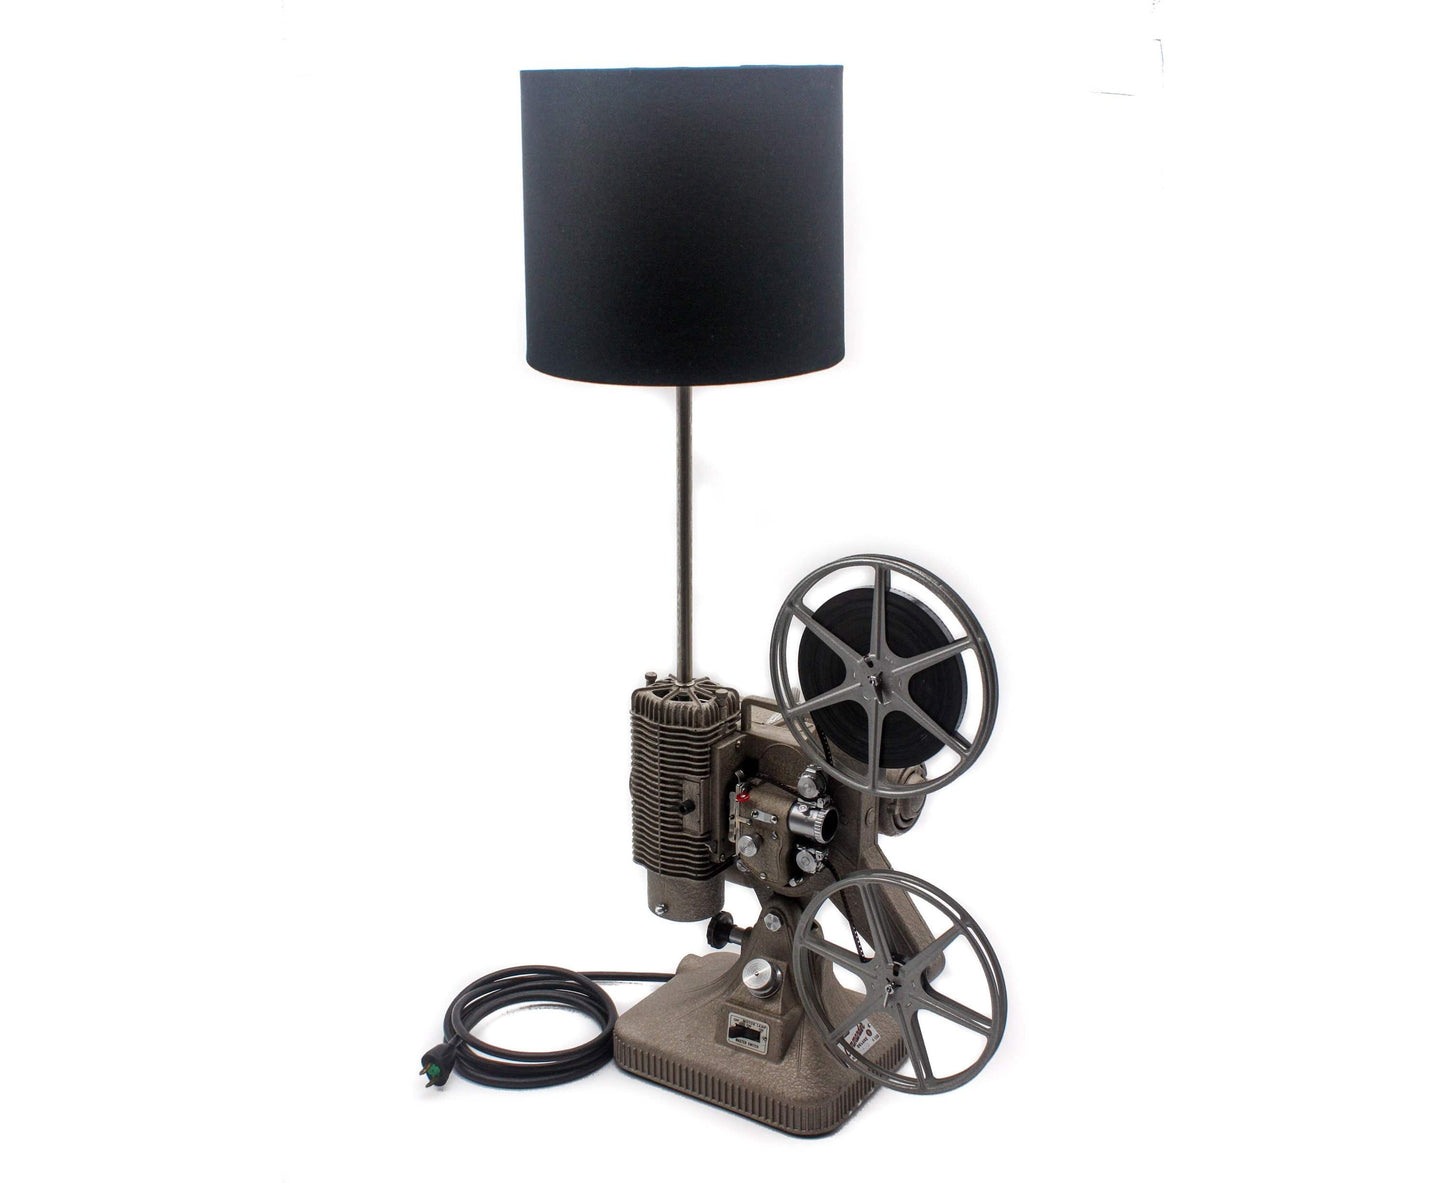 LightAndTimeArt Projector Lamp Movie Projector Table Lamp,  Home Theater Décor, Film Art, Media Room, Movie Room, Movie Maker Gift, Actor & Actress Gift,  Keystone K108